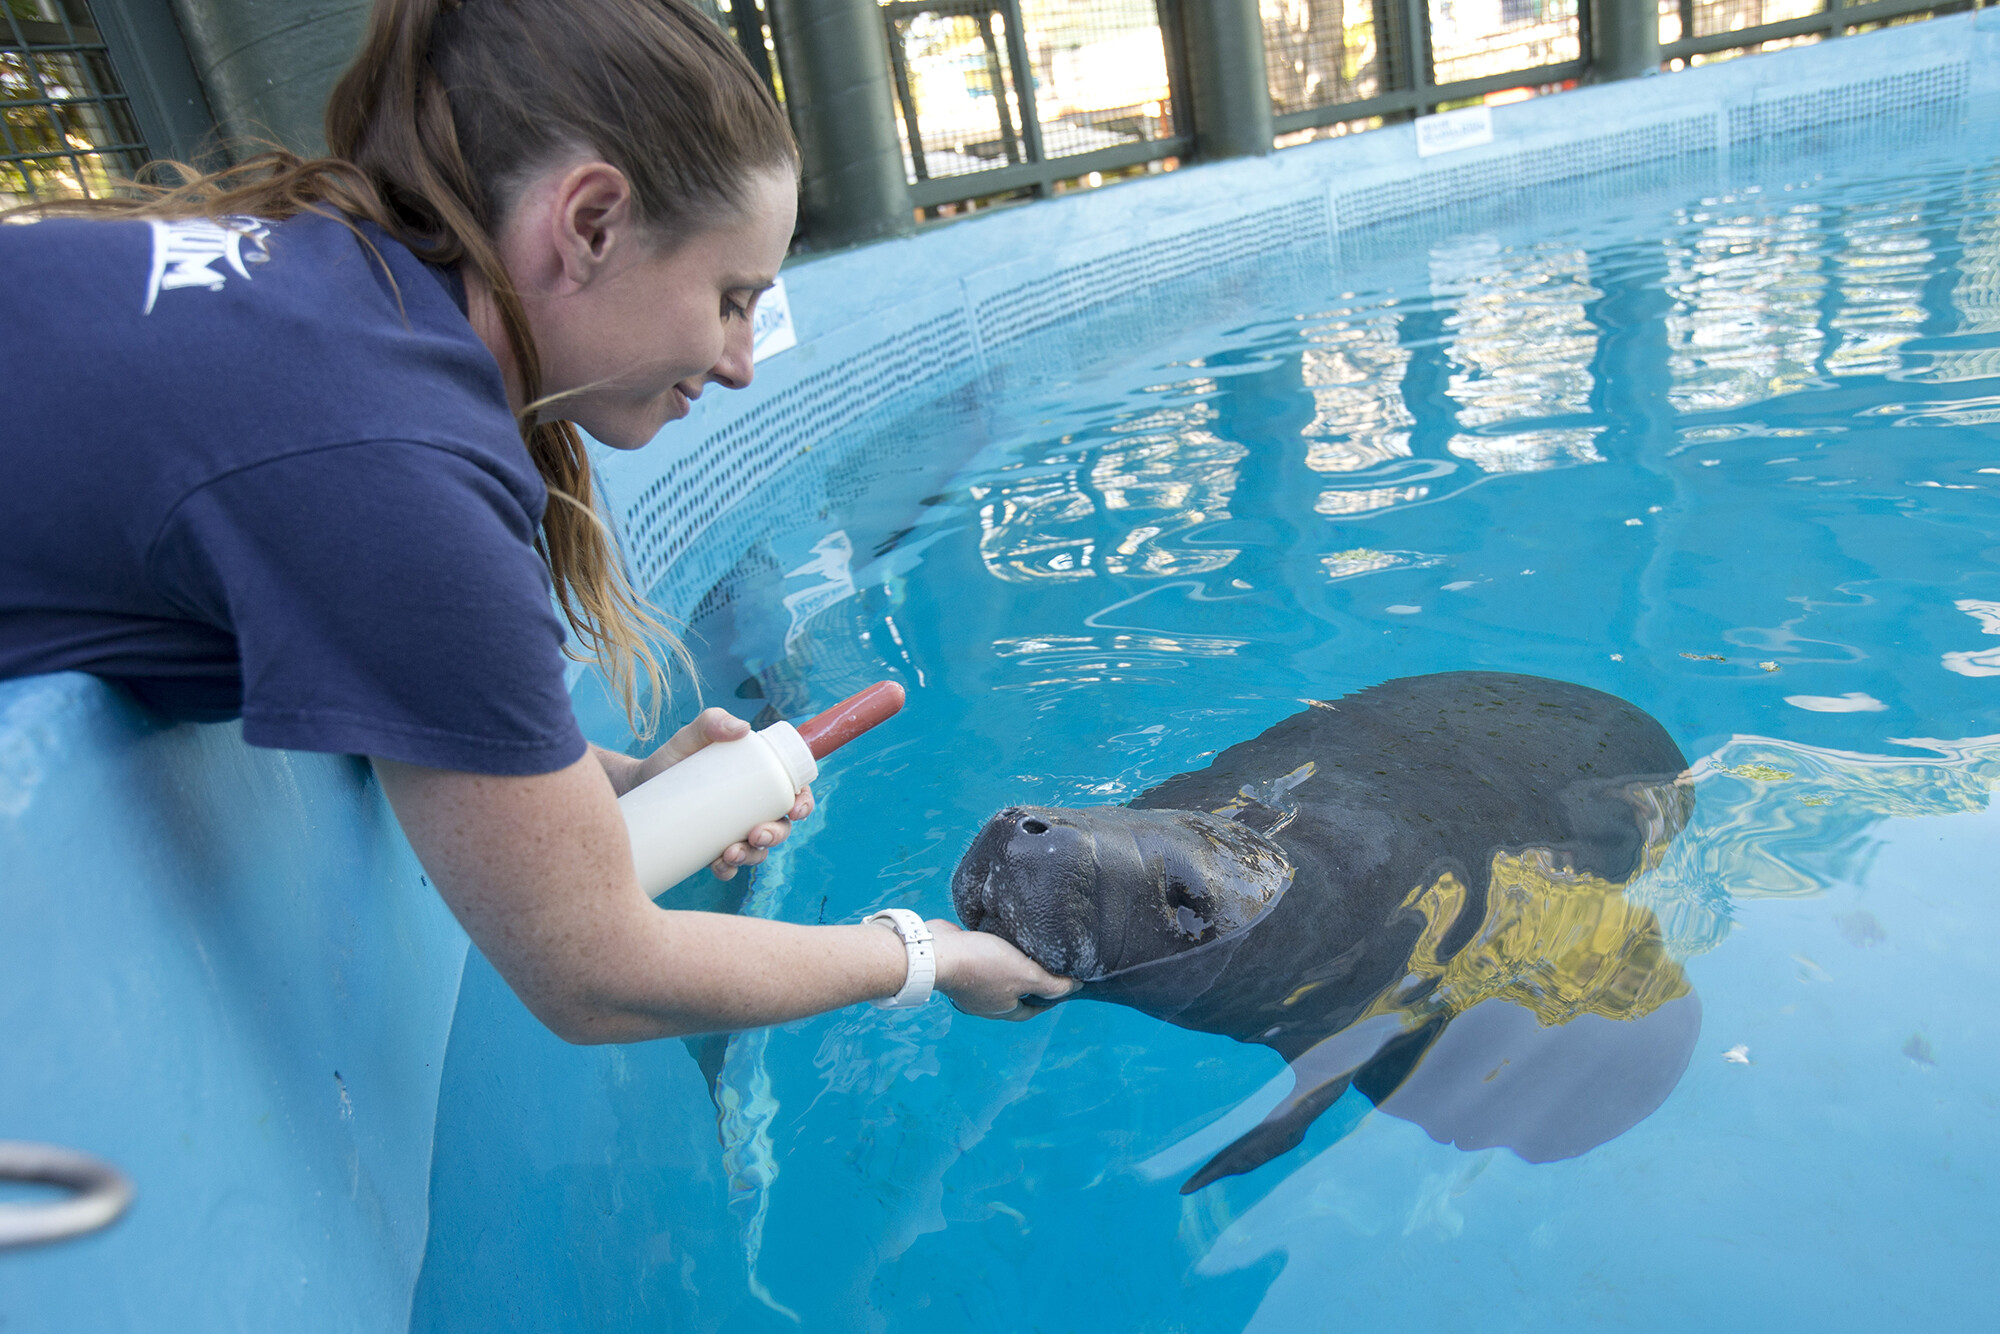 manatee being cared for in pool